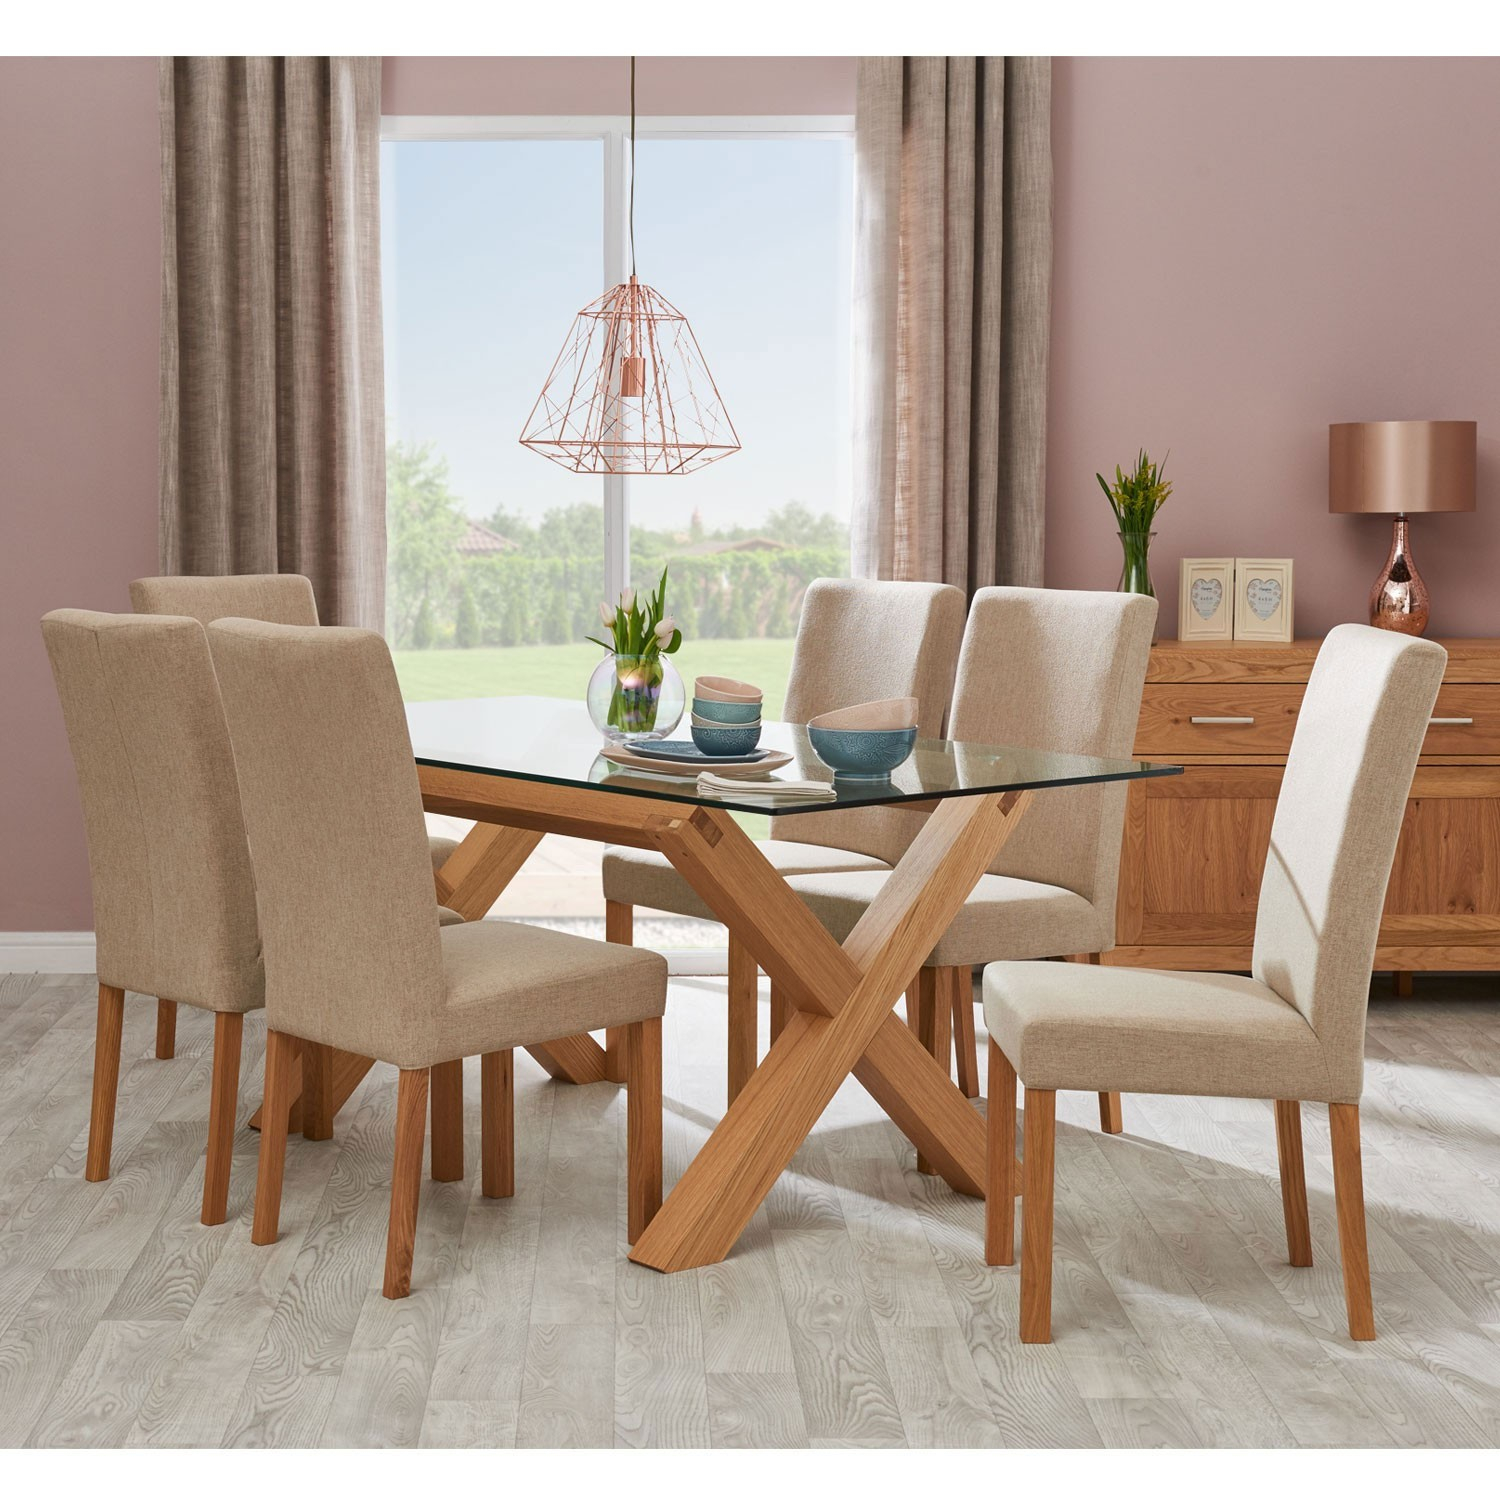 Casa Toledo Glass Table 6 Upholstered Chairs Dining Set throughout sizing 1500 X 1500